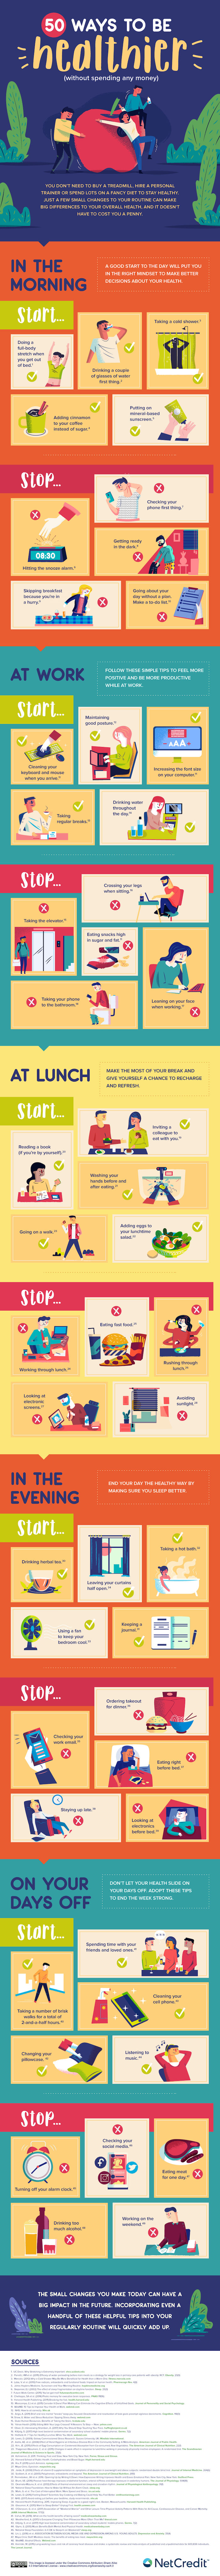 Infographic: Become healthier at Work